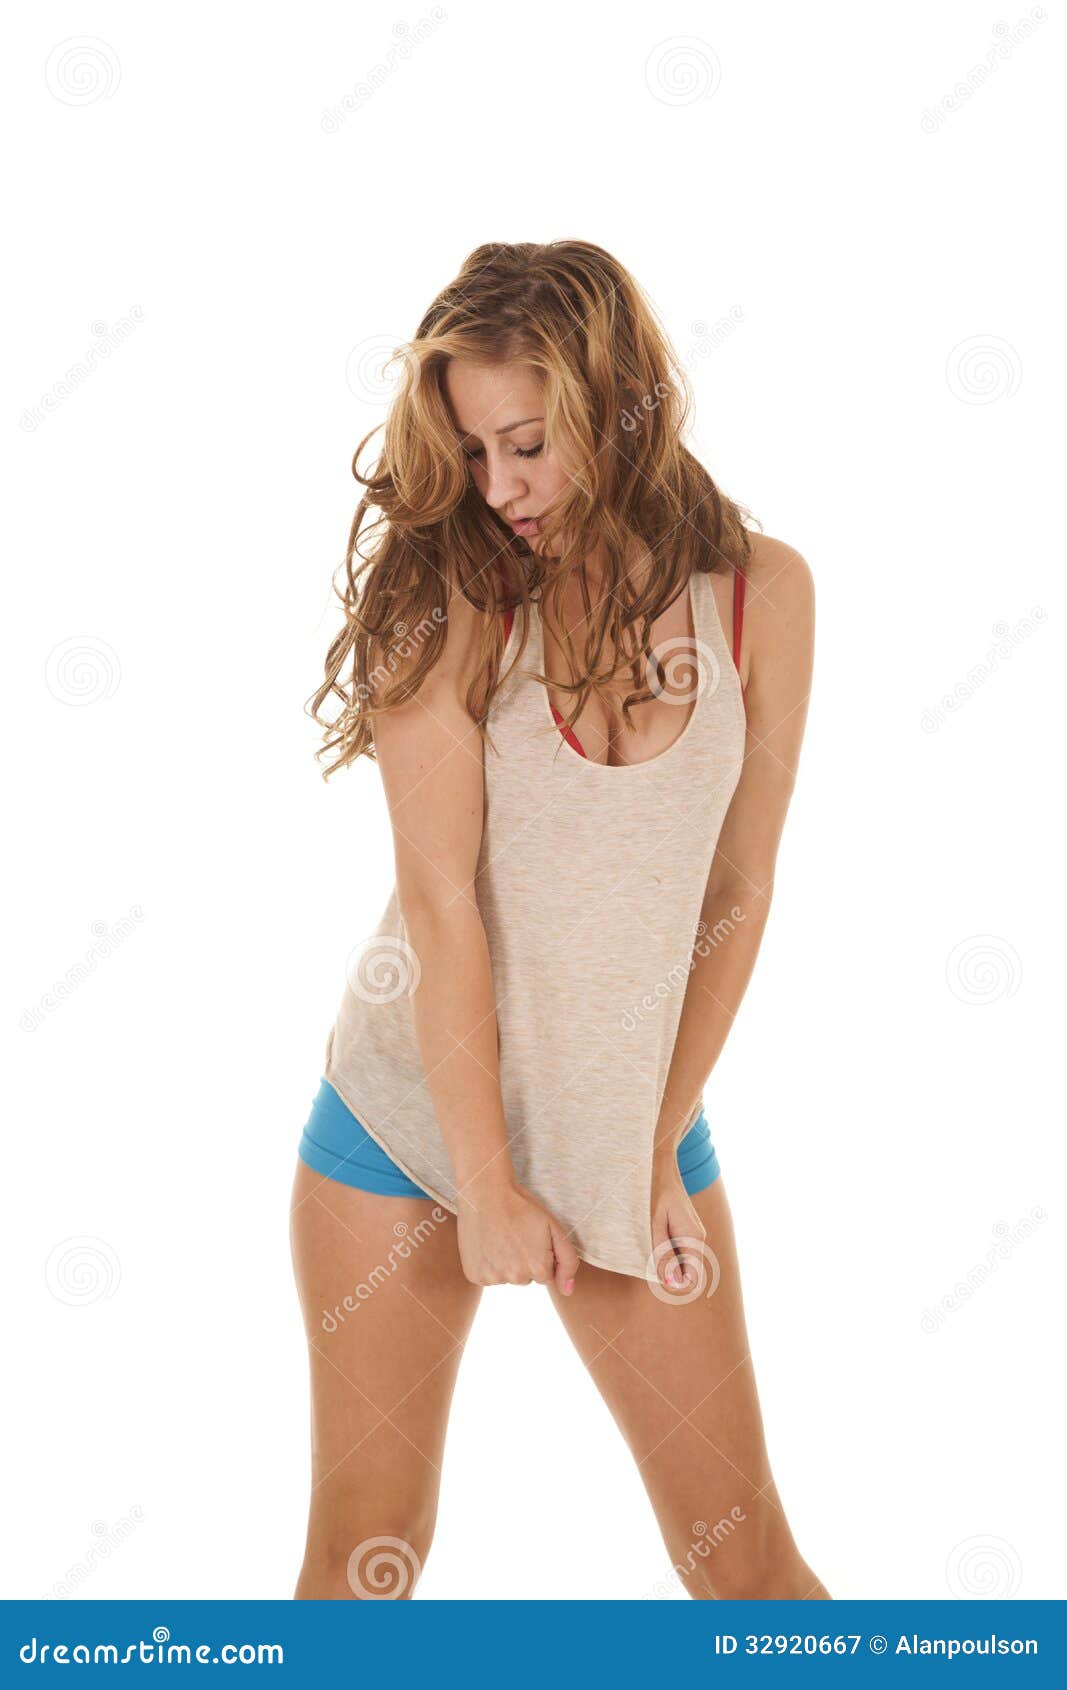 A woman in her underwear pulling down on her shirt. 